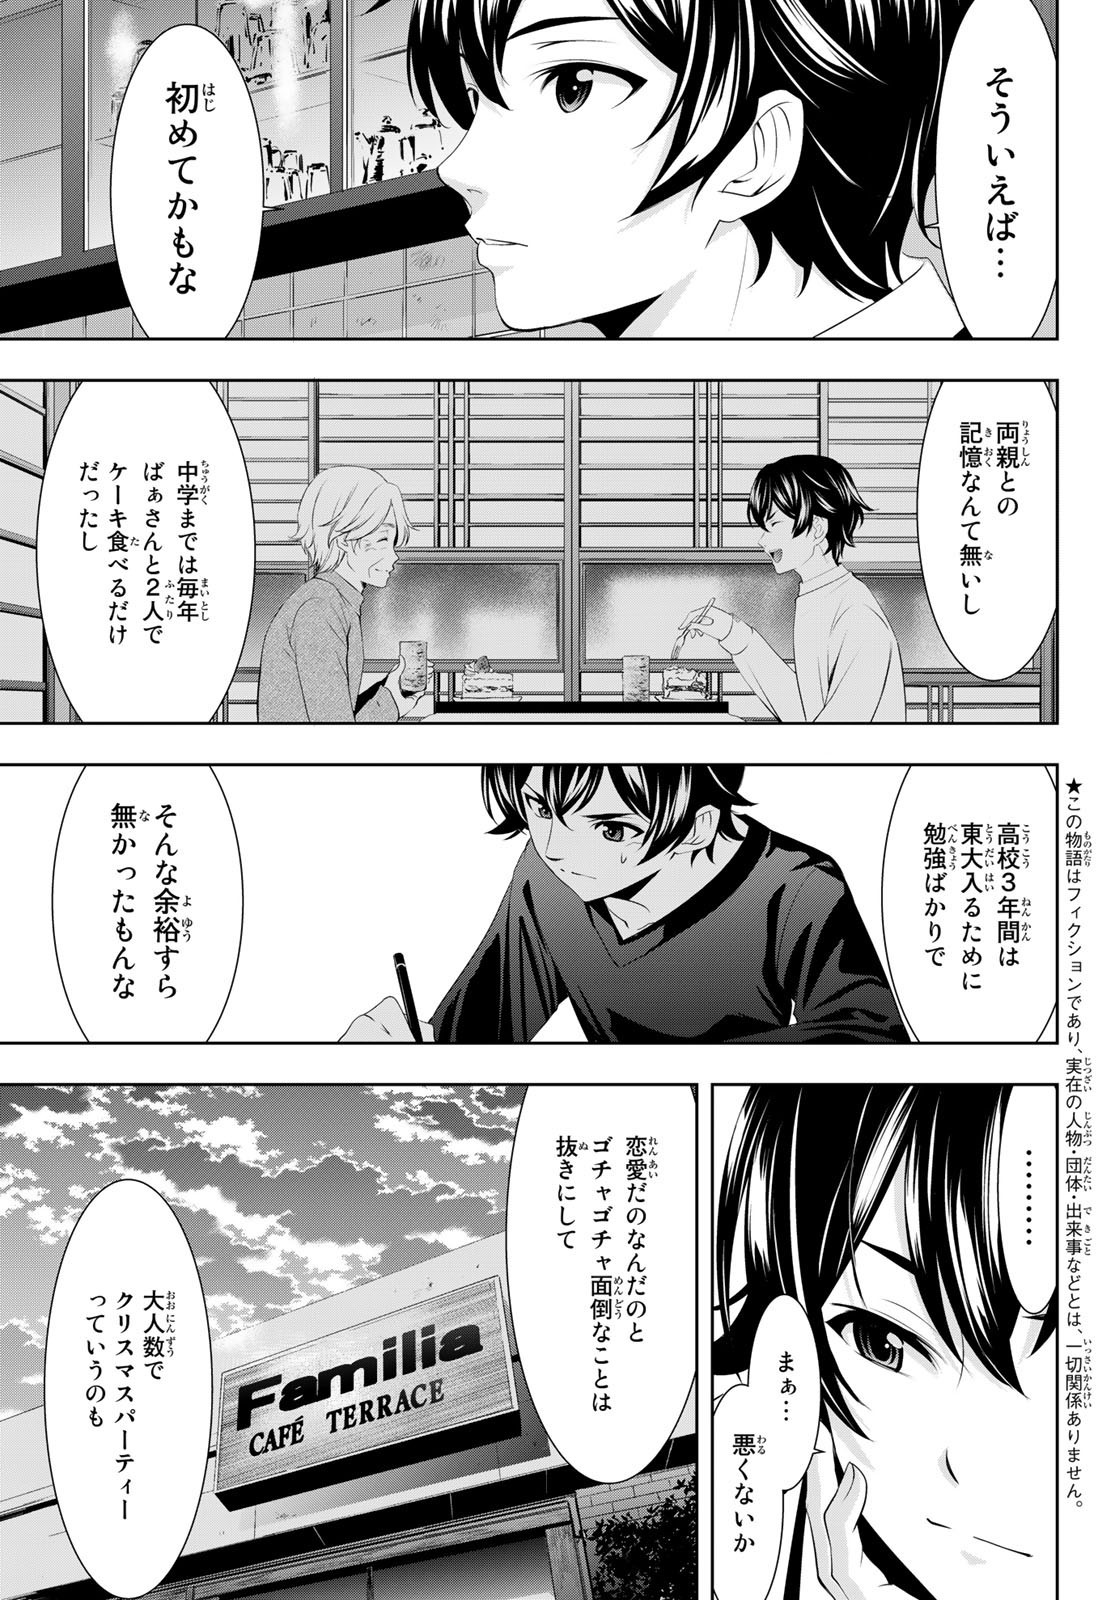 Goddess-Cafe-Terrace - Chapter 076 - Page 3